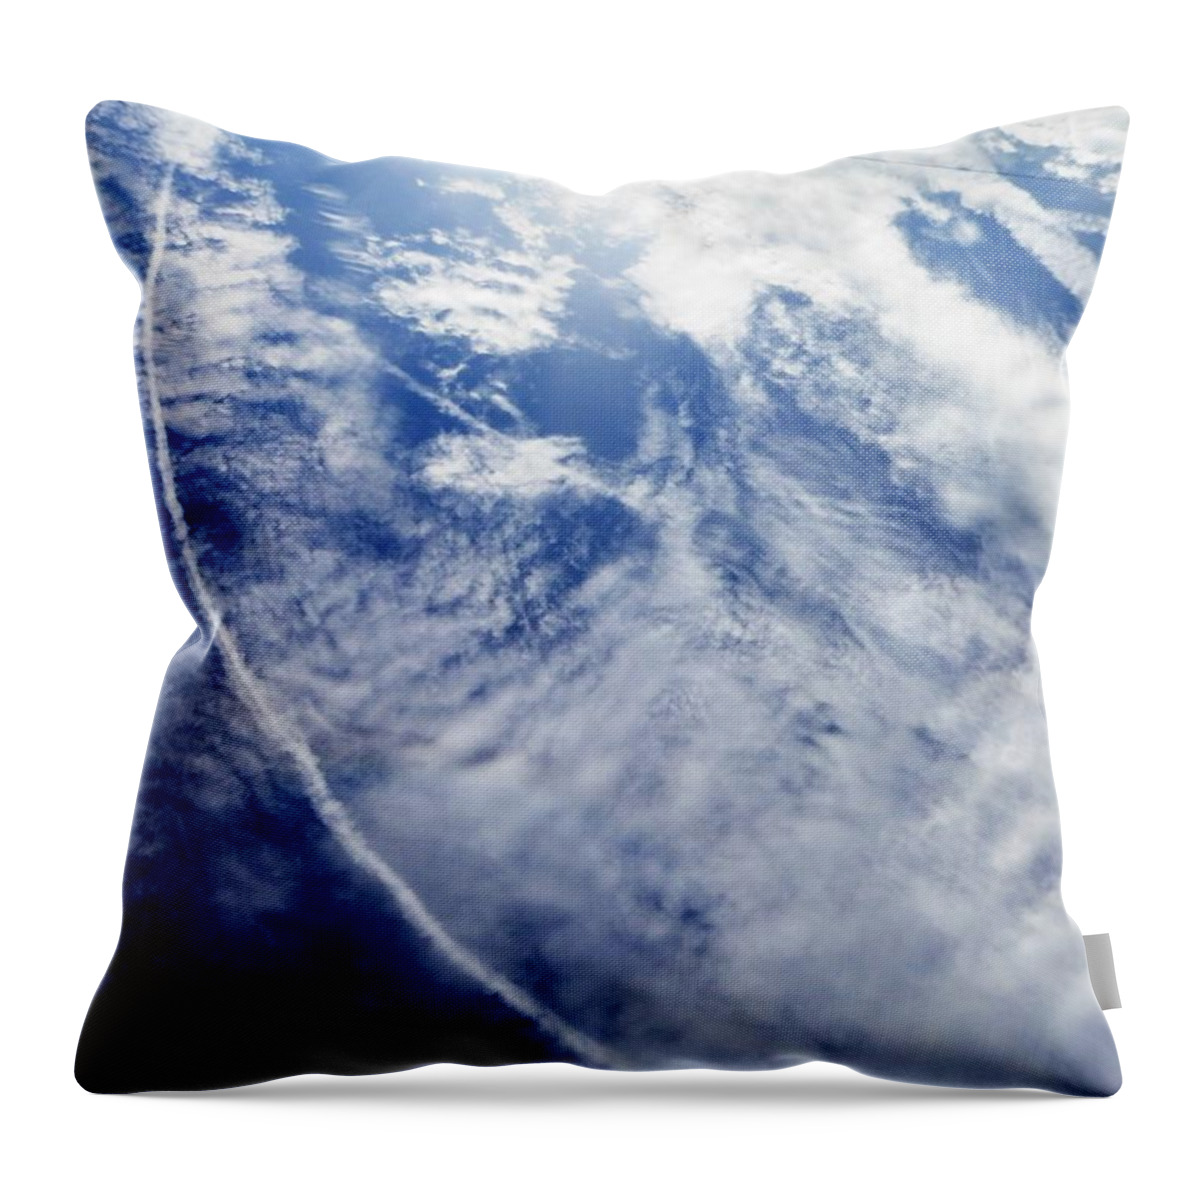 Check Out This Cool Sky Shot Of A Variety Of White Clouds And Jet Stream Against The Blue Wow Love The Contrast Of Shapes! Throw Pillow featuring the photograph Look at That Sky by Belinda Lee